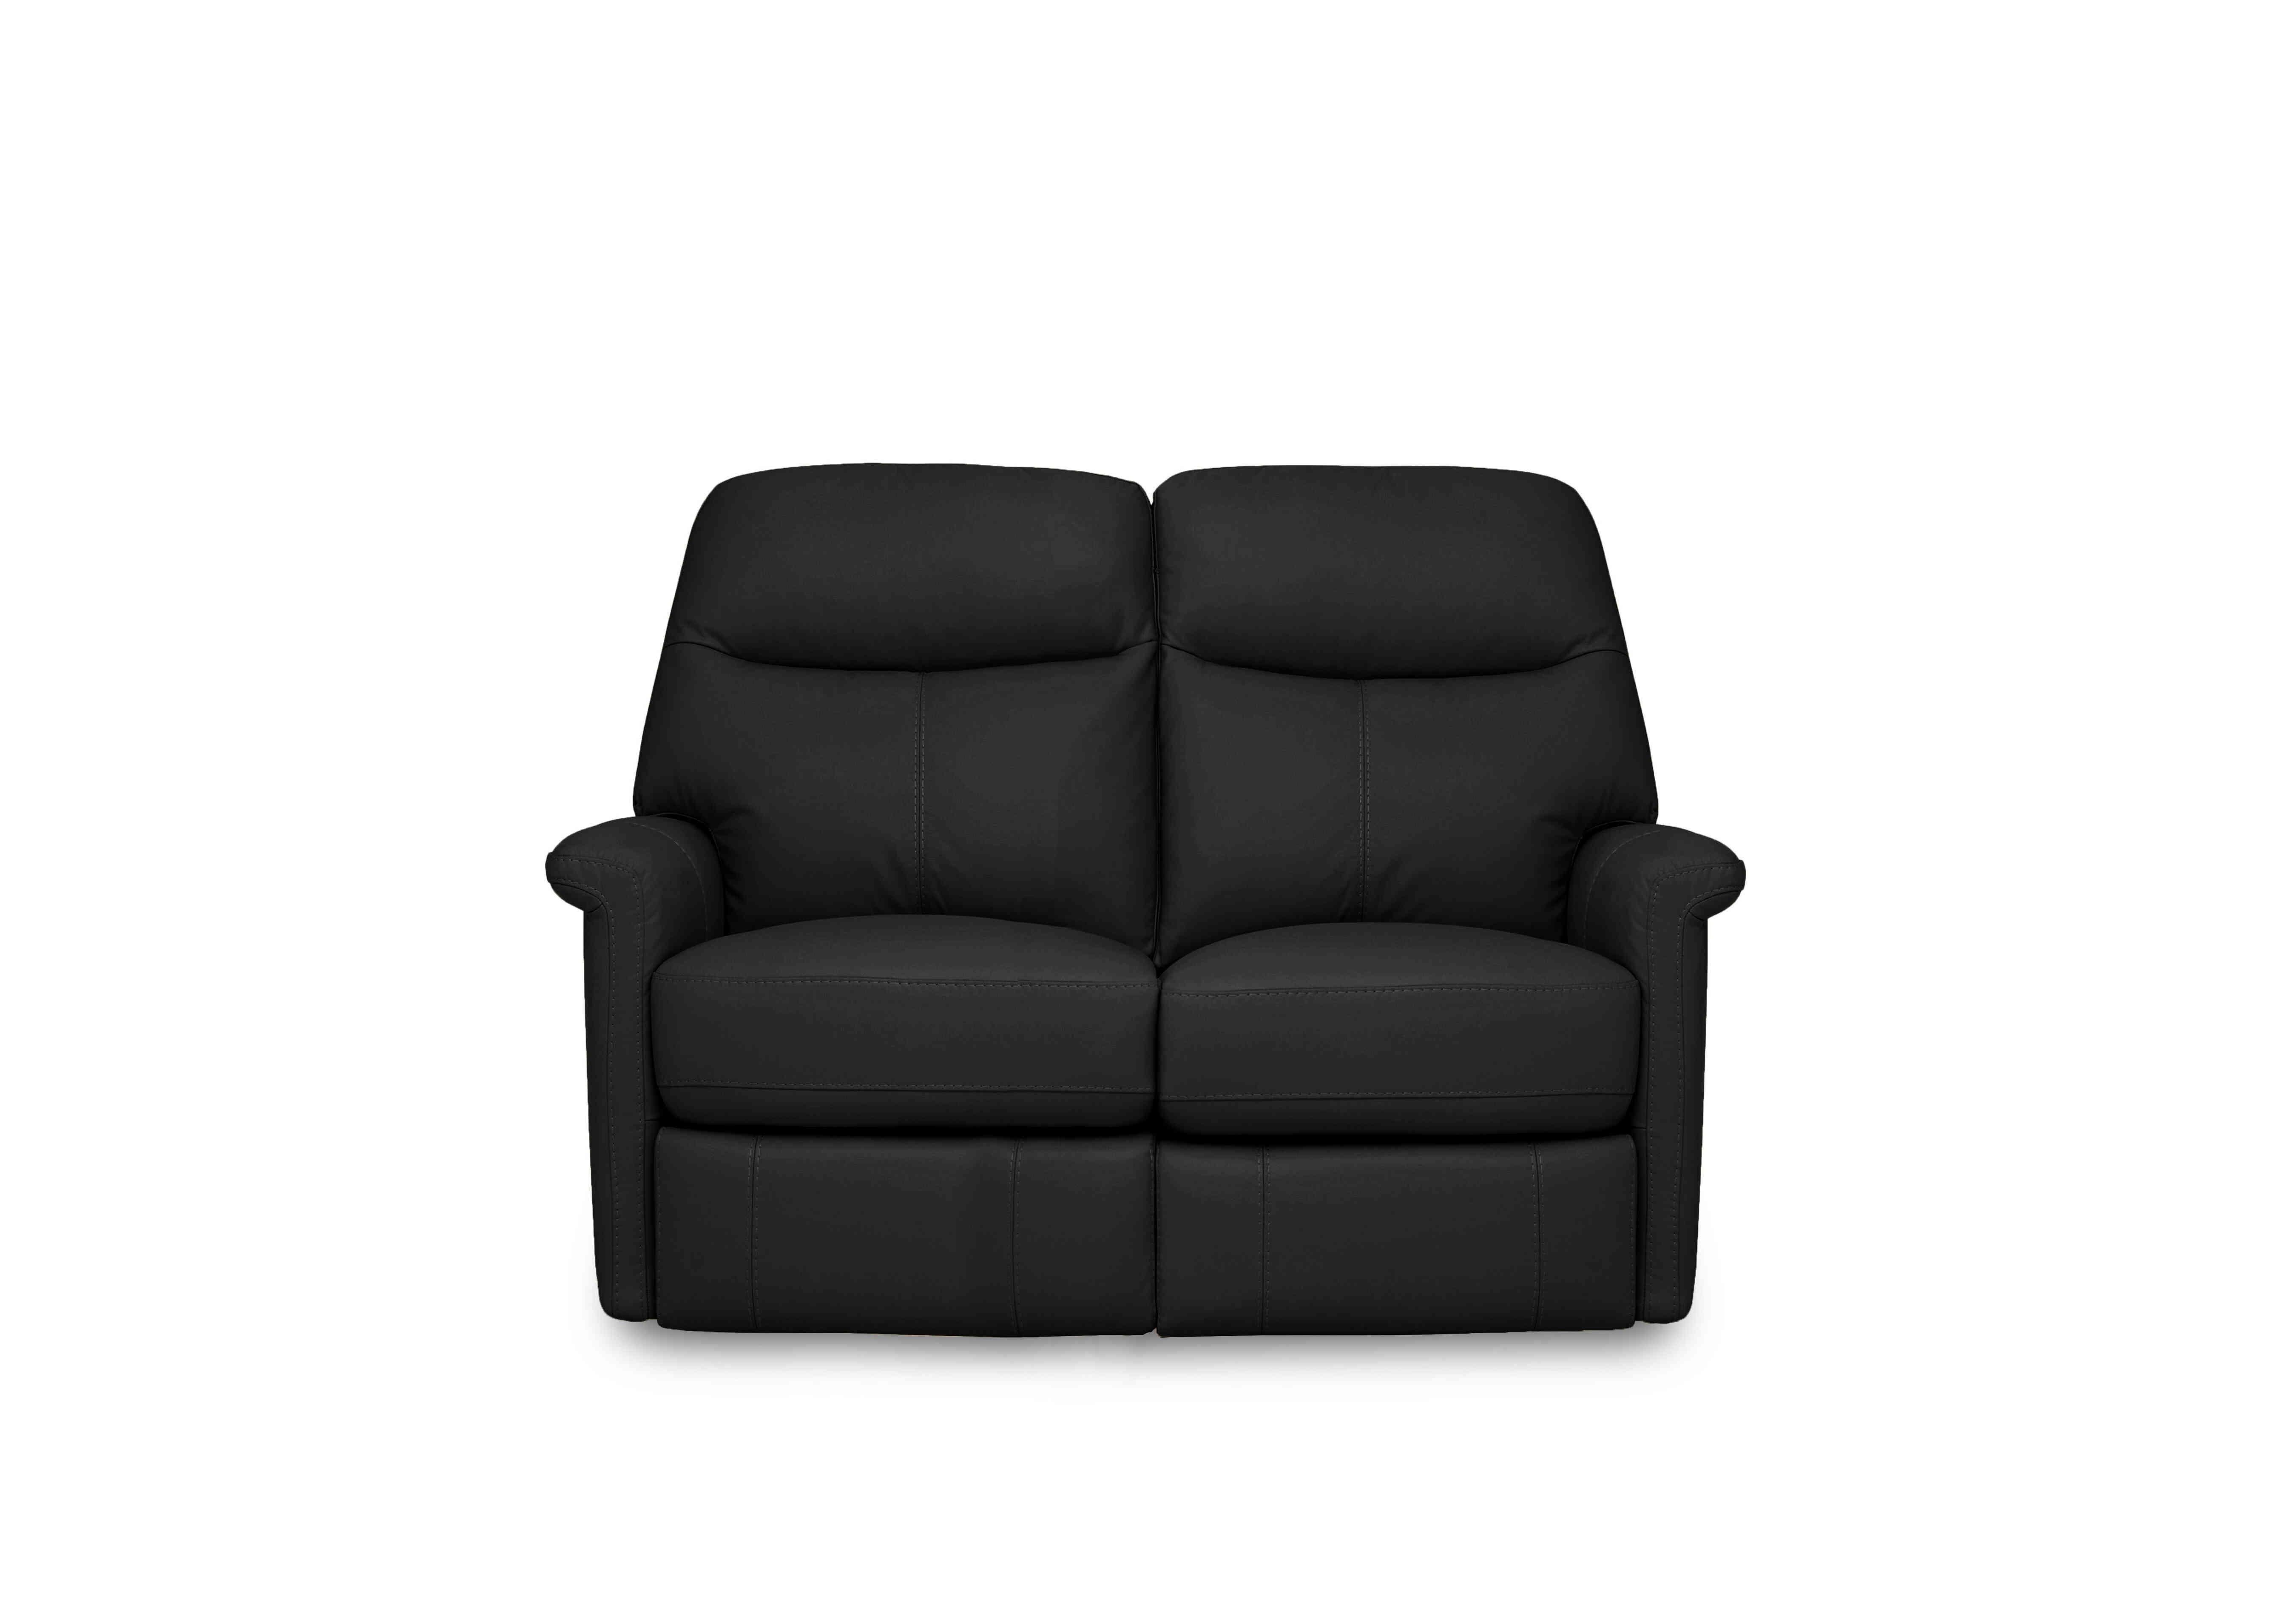 Compact Collection Lille 2 Seater Leather Sofa in Bv-3500 Classic Black on Furniture Village